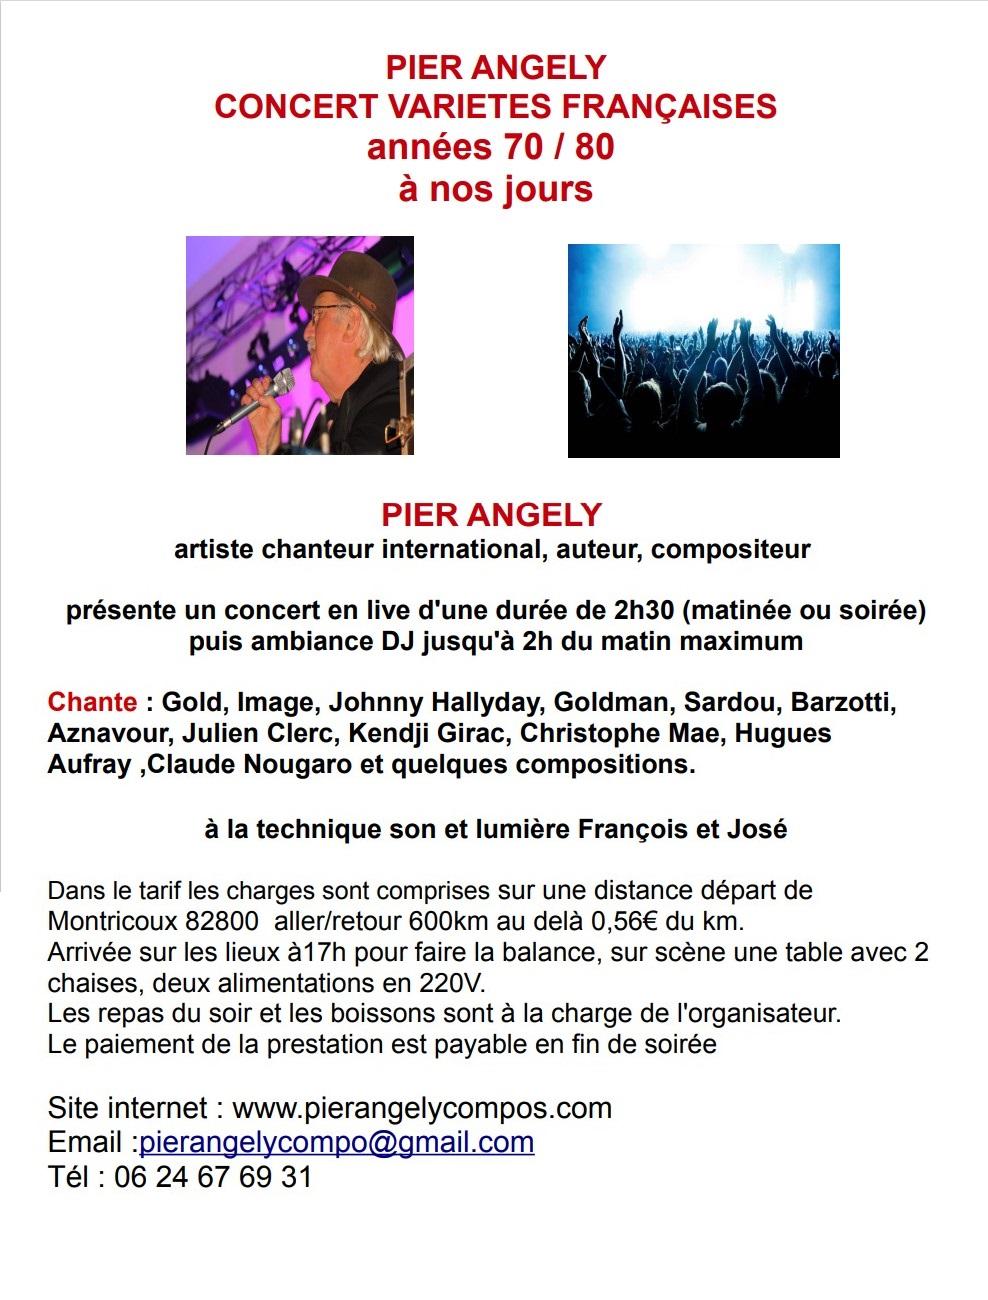 Pier angely concerts